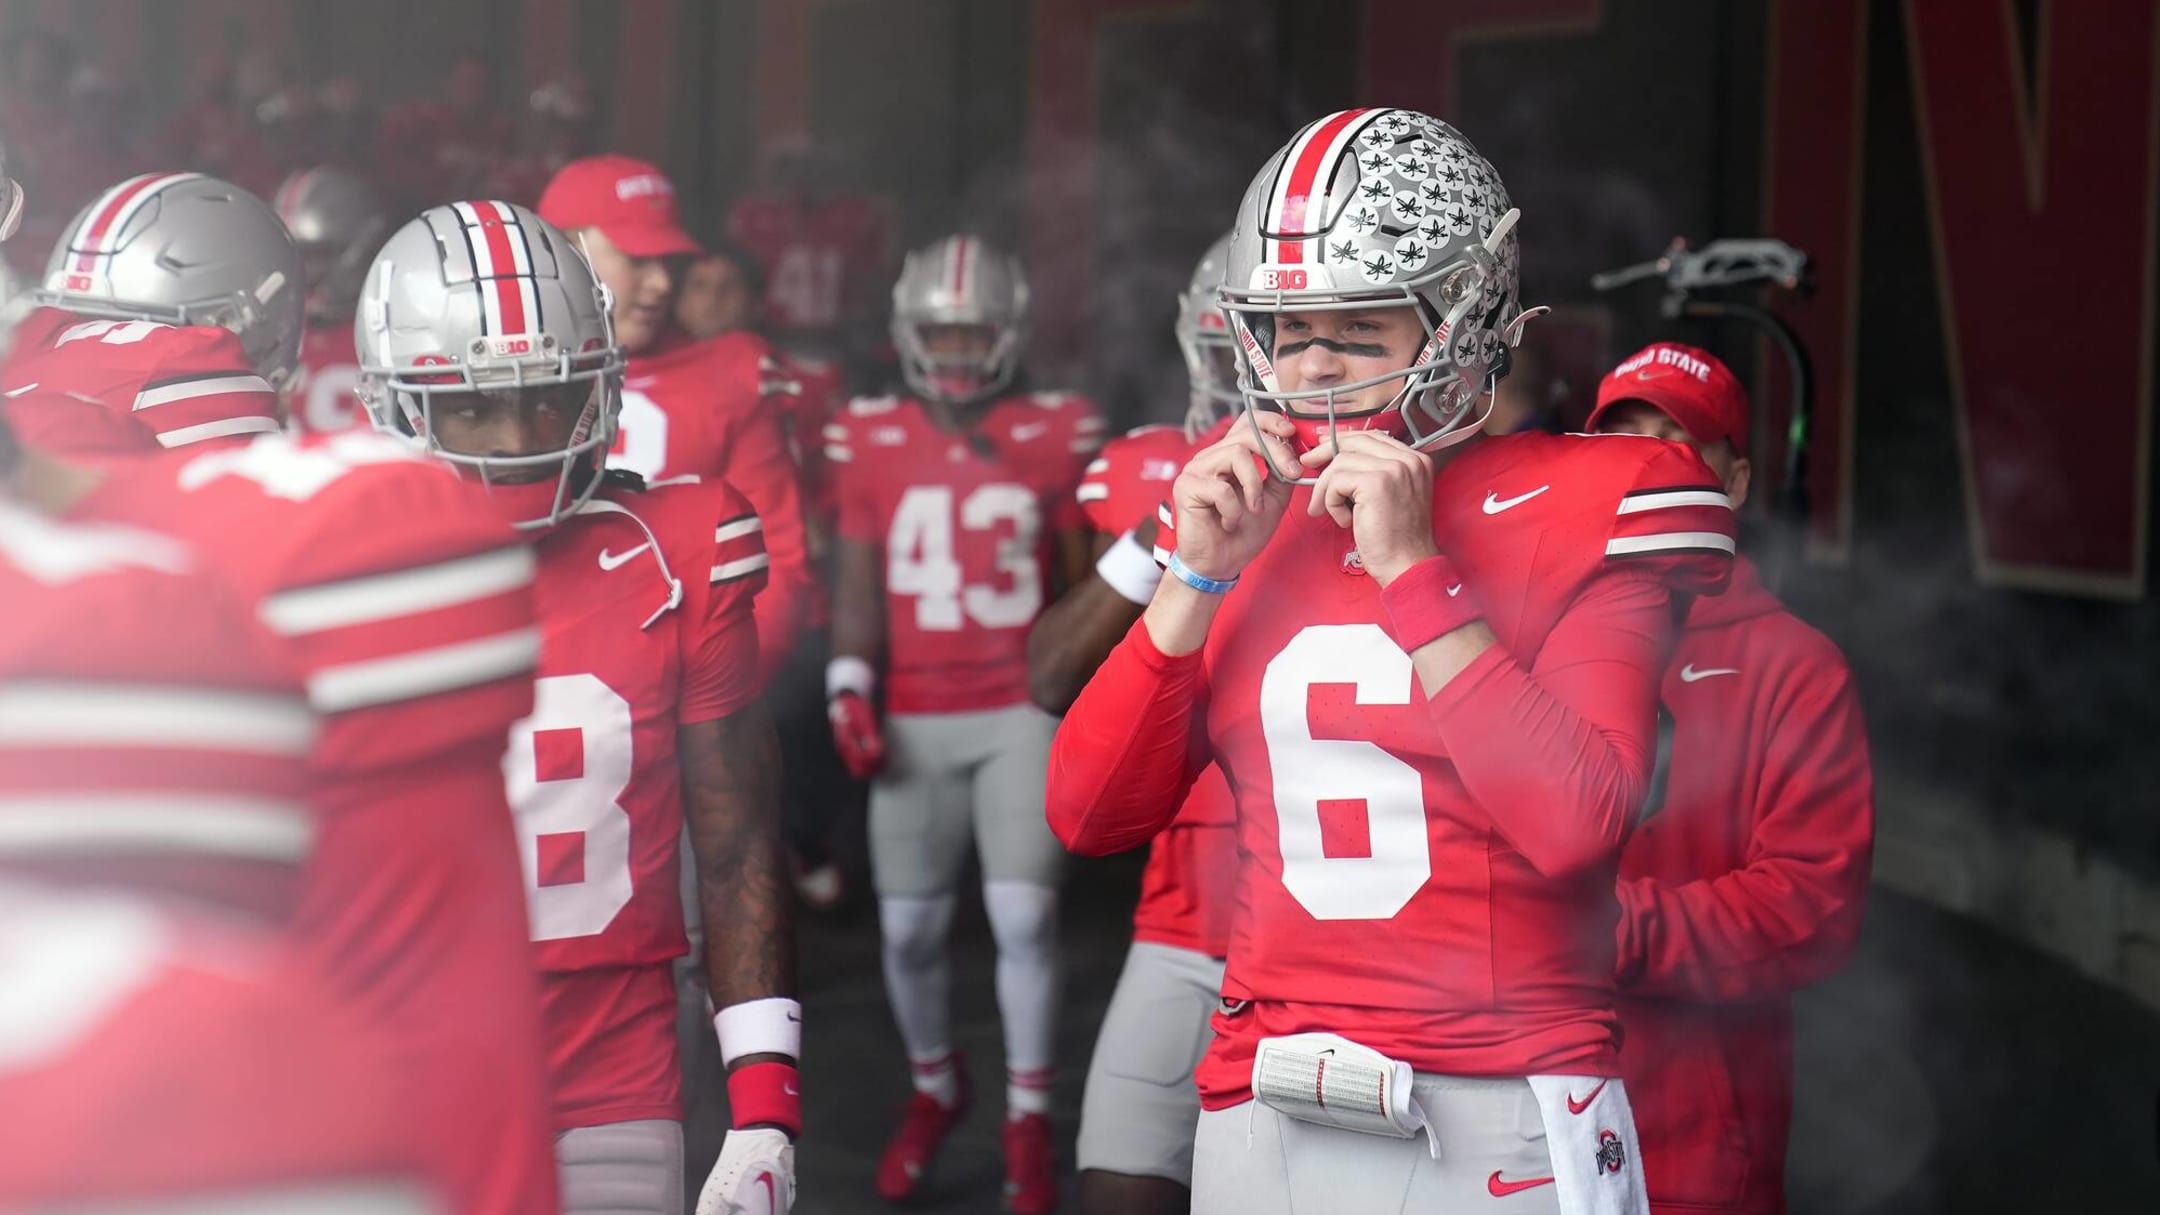 Ohio State football pivots to a defense-first mentality - ESPN